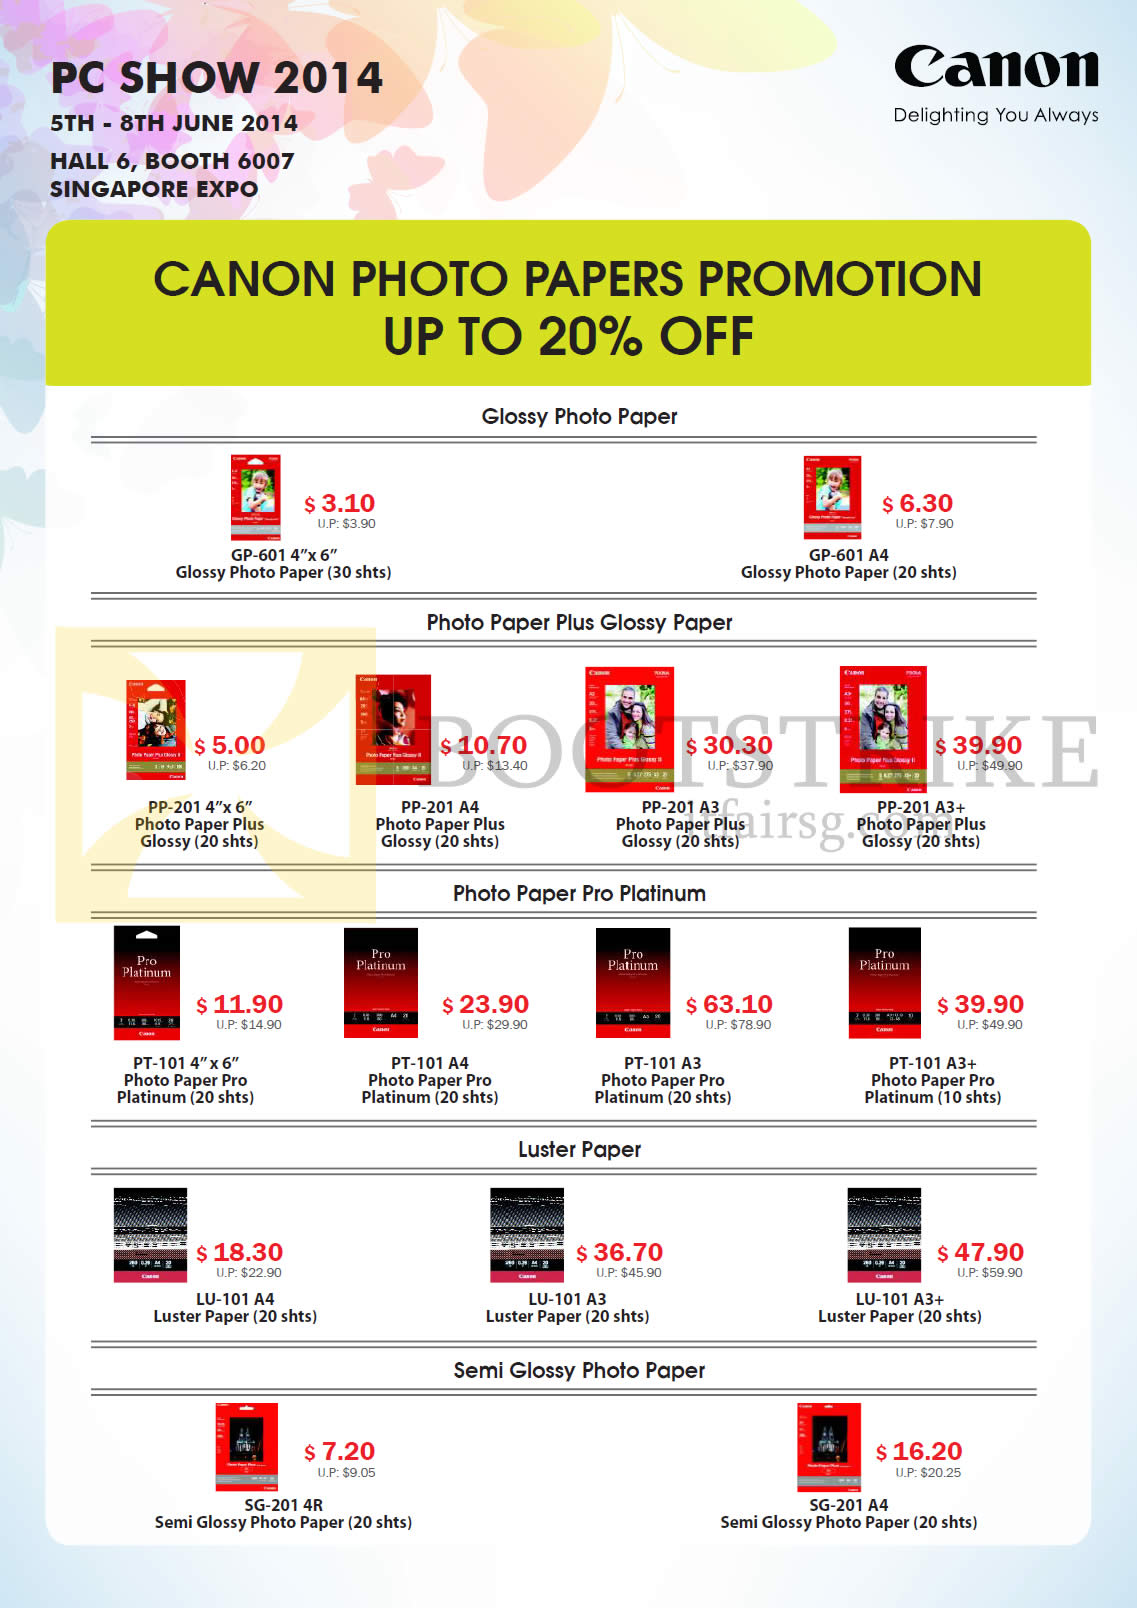 PC SHOW 2014 price list image brochure of Canon Photo Papers Glossy, Photo Paper Plus Glossy, Pro Platinum, Luster Paper, Semi Glossy